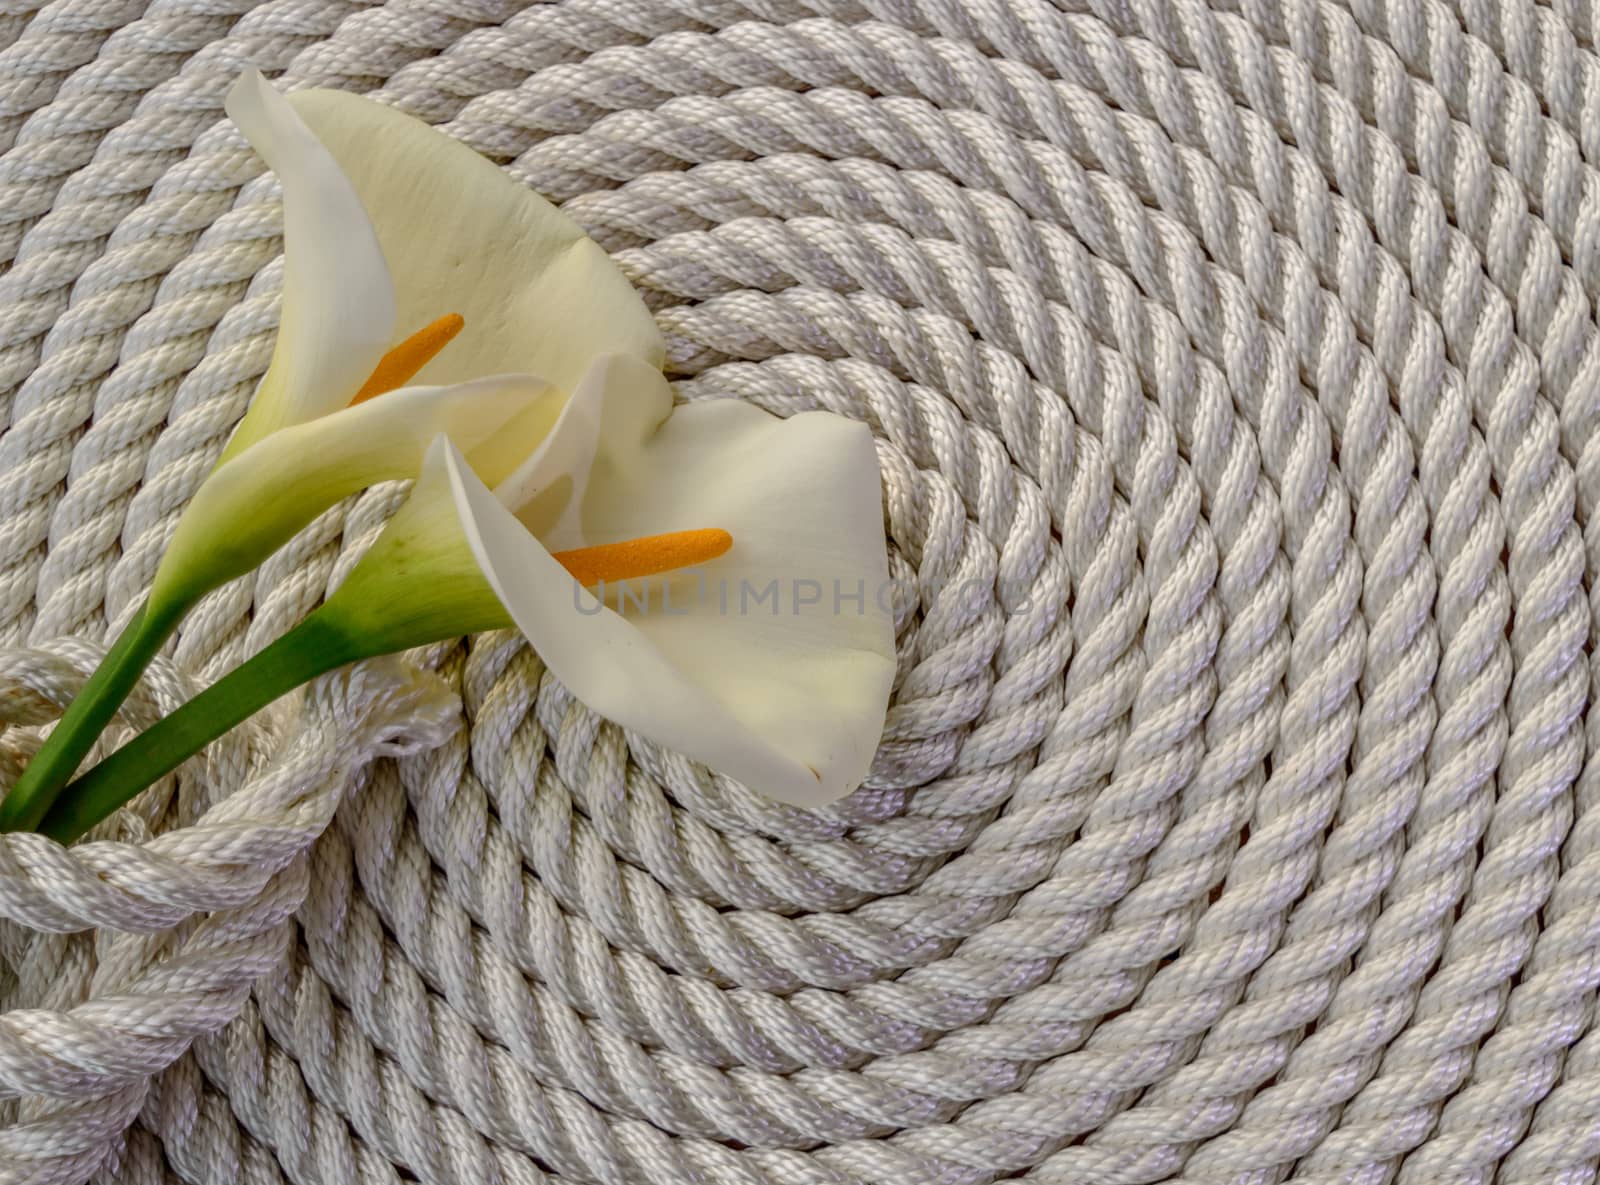 Beautiful white Calla lily over rope and wooden table  by radzonimo